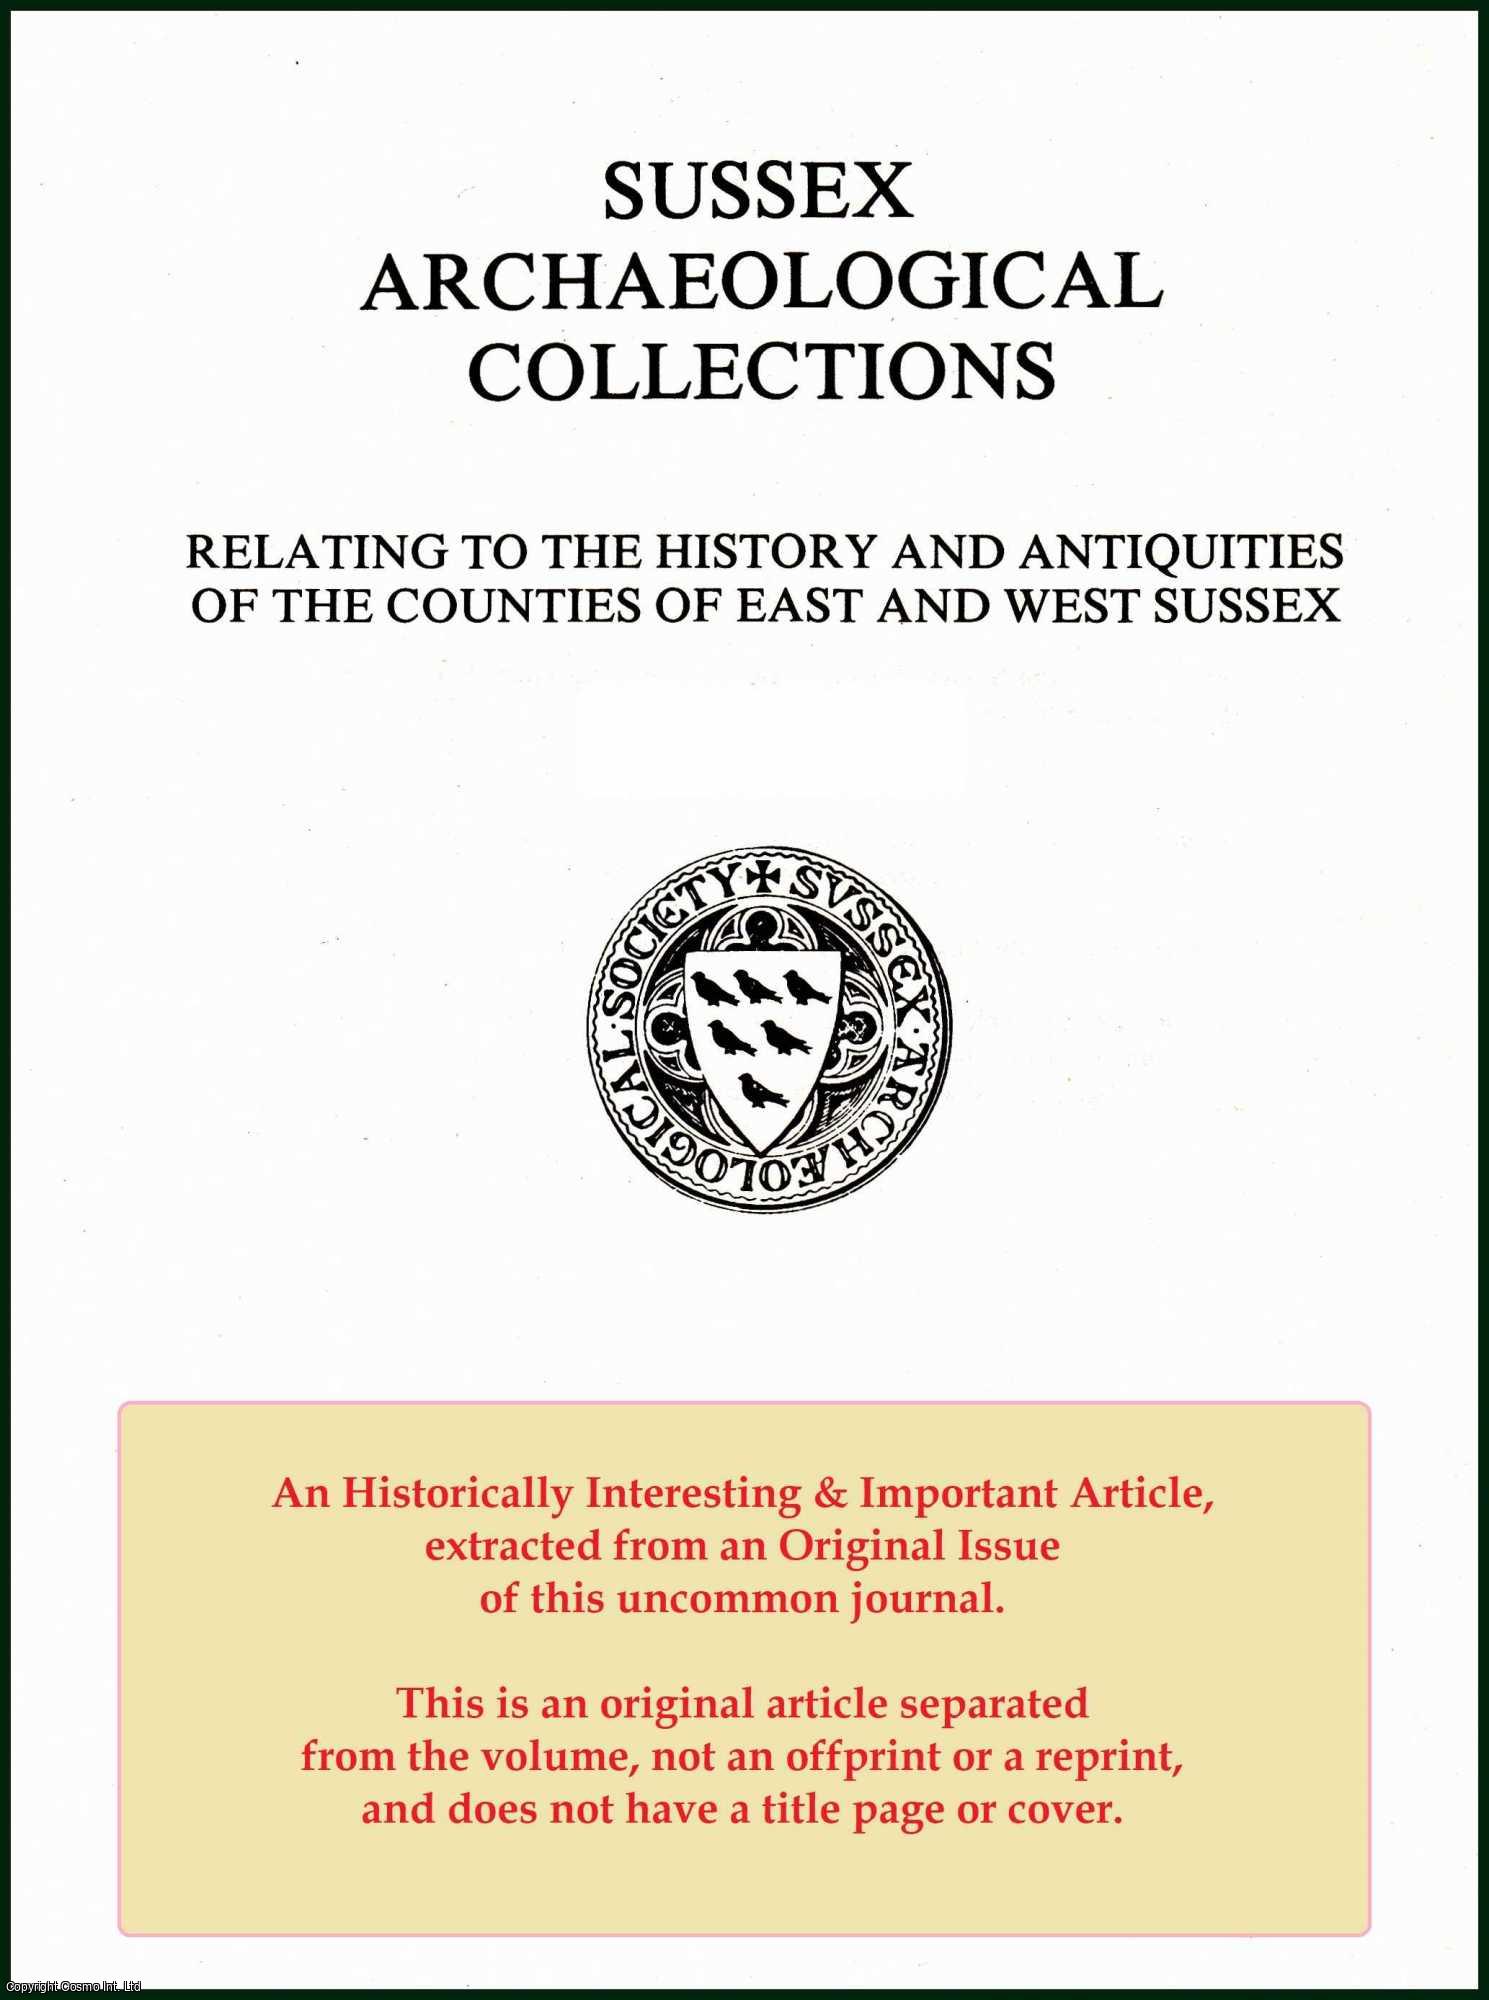 R. F. Hunnisett - The Last Sussex Abjurations. An original article from the Journal of the Sussex Archaeological Society, 1964.